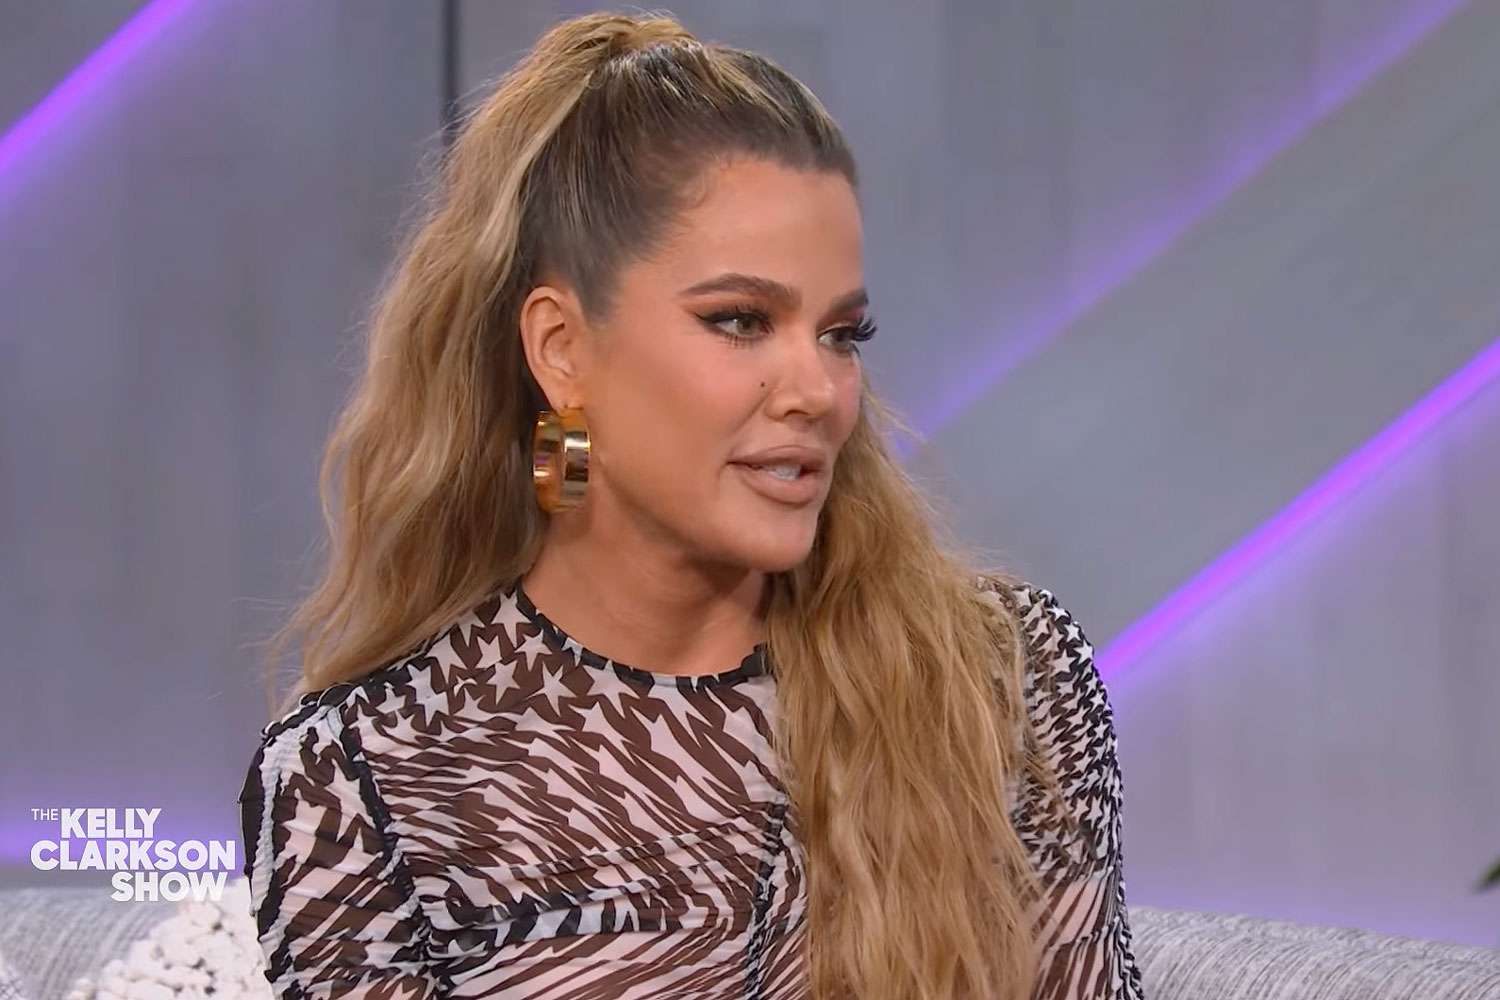 Khloe Kardashian’s Comments Flooded With Condolences After Death of OJ Simpson